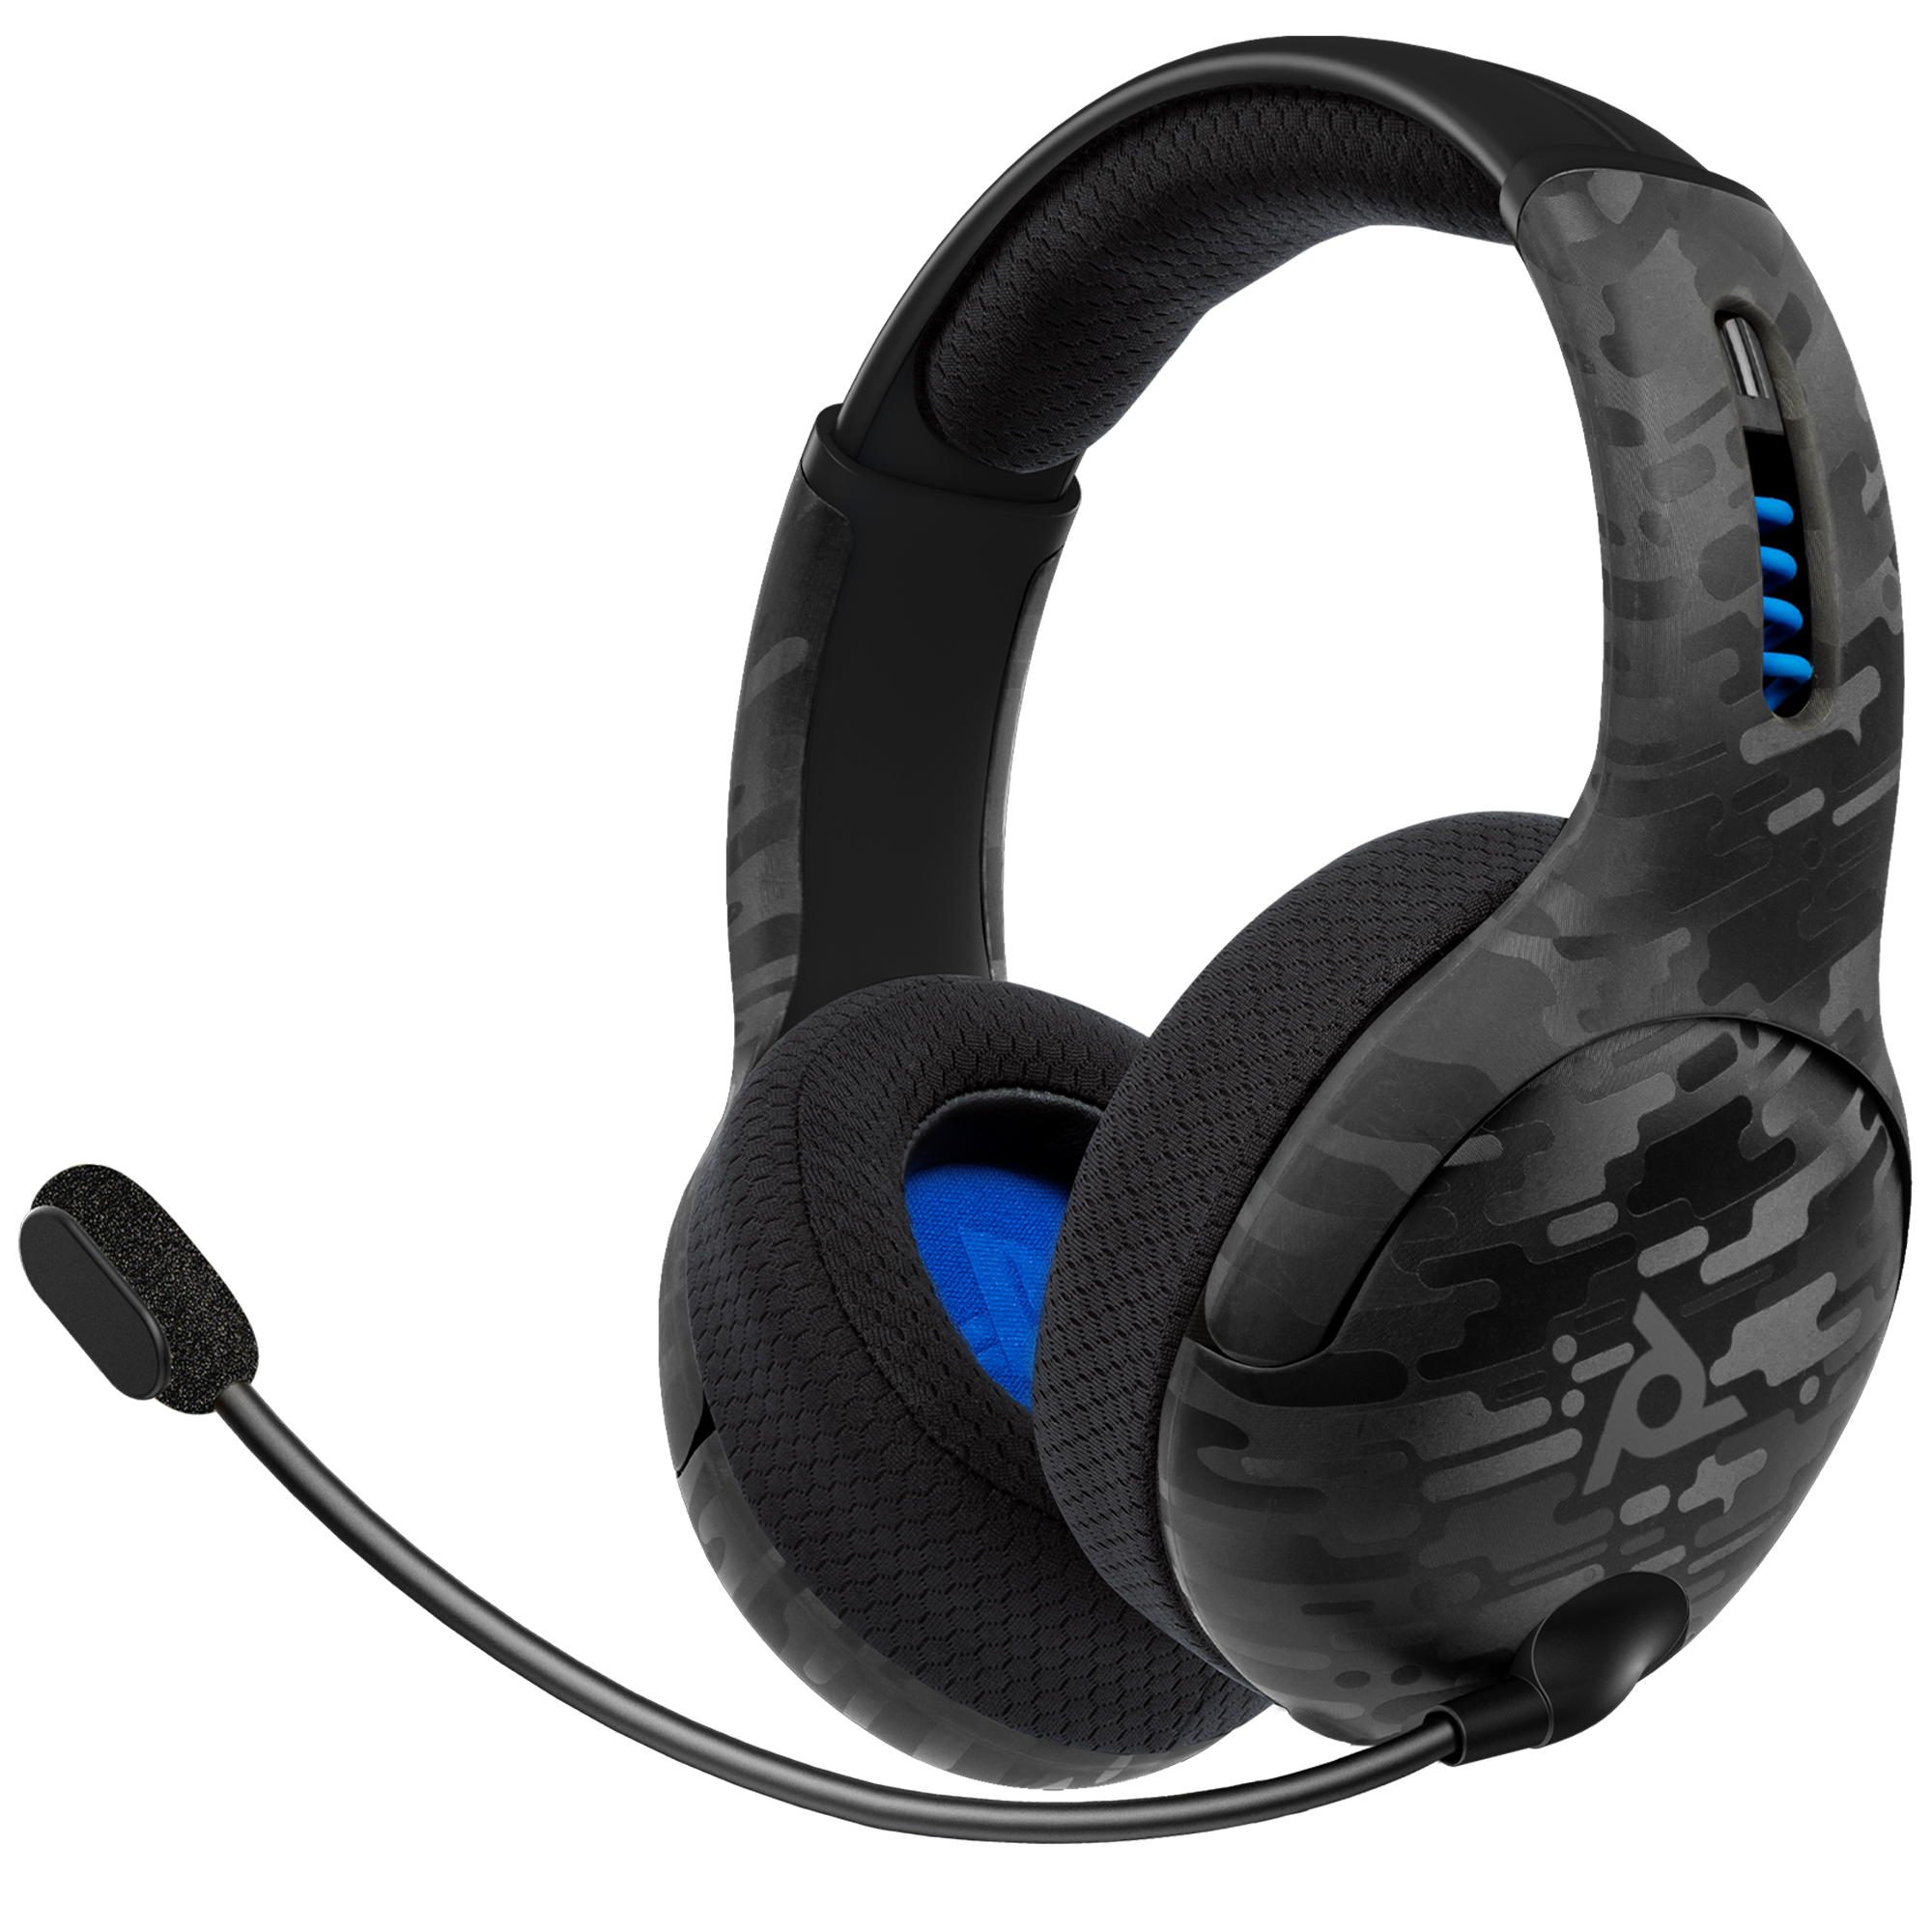 PDP AIRLITE Headset with Mic for PS5, PS4, PC - Black Camo Wired